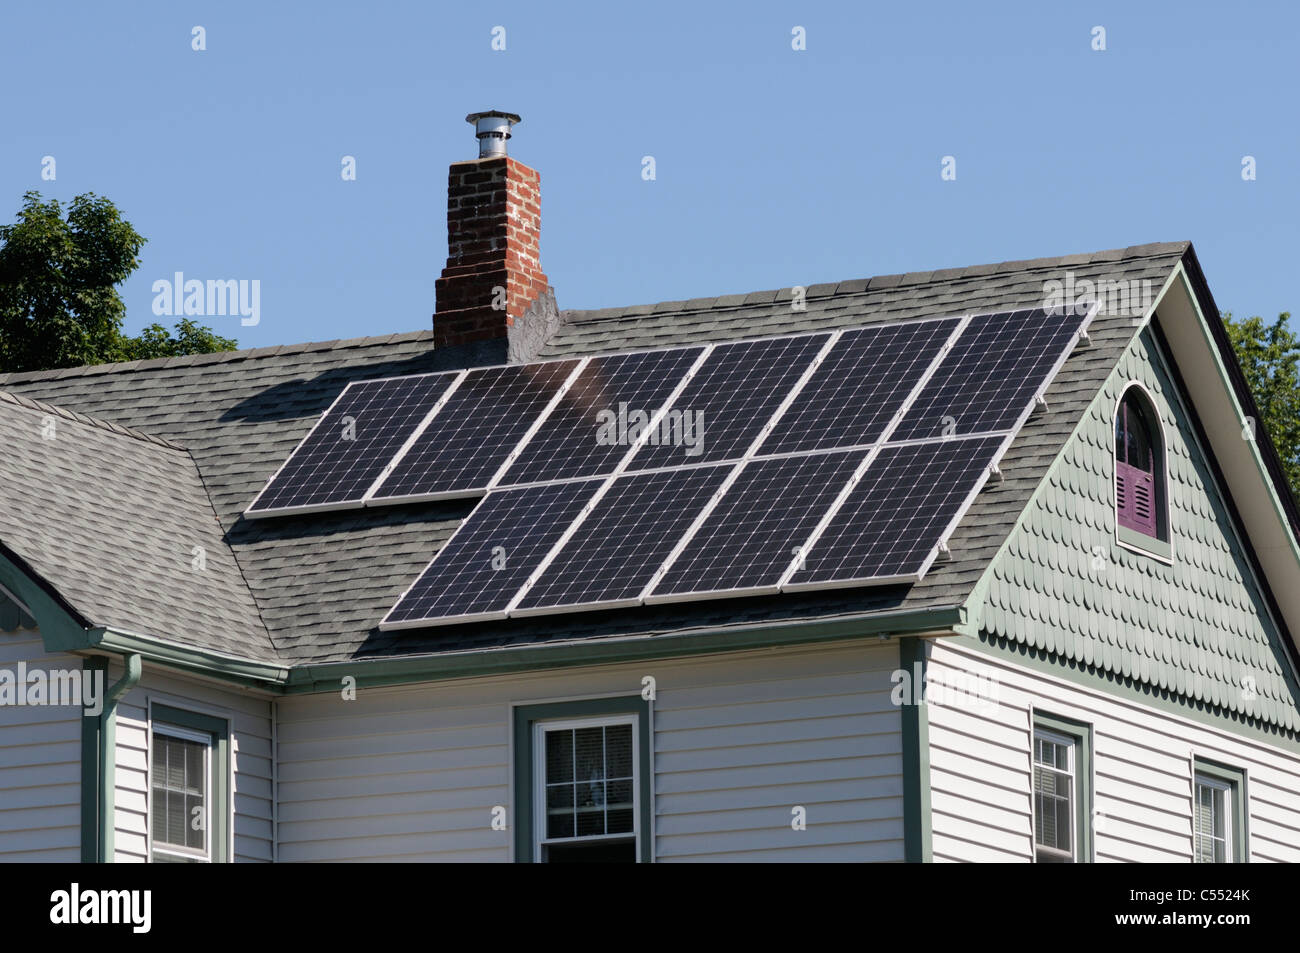 Photovoltaic solar panels on roof of  house Stock Photo